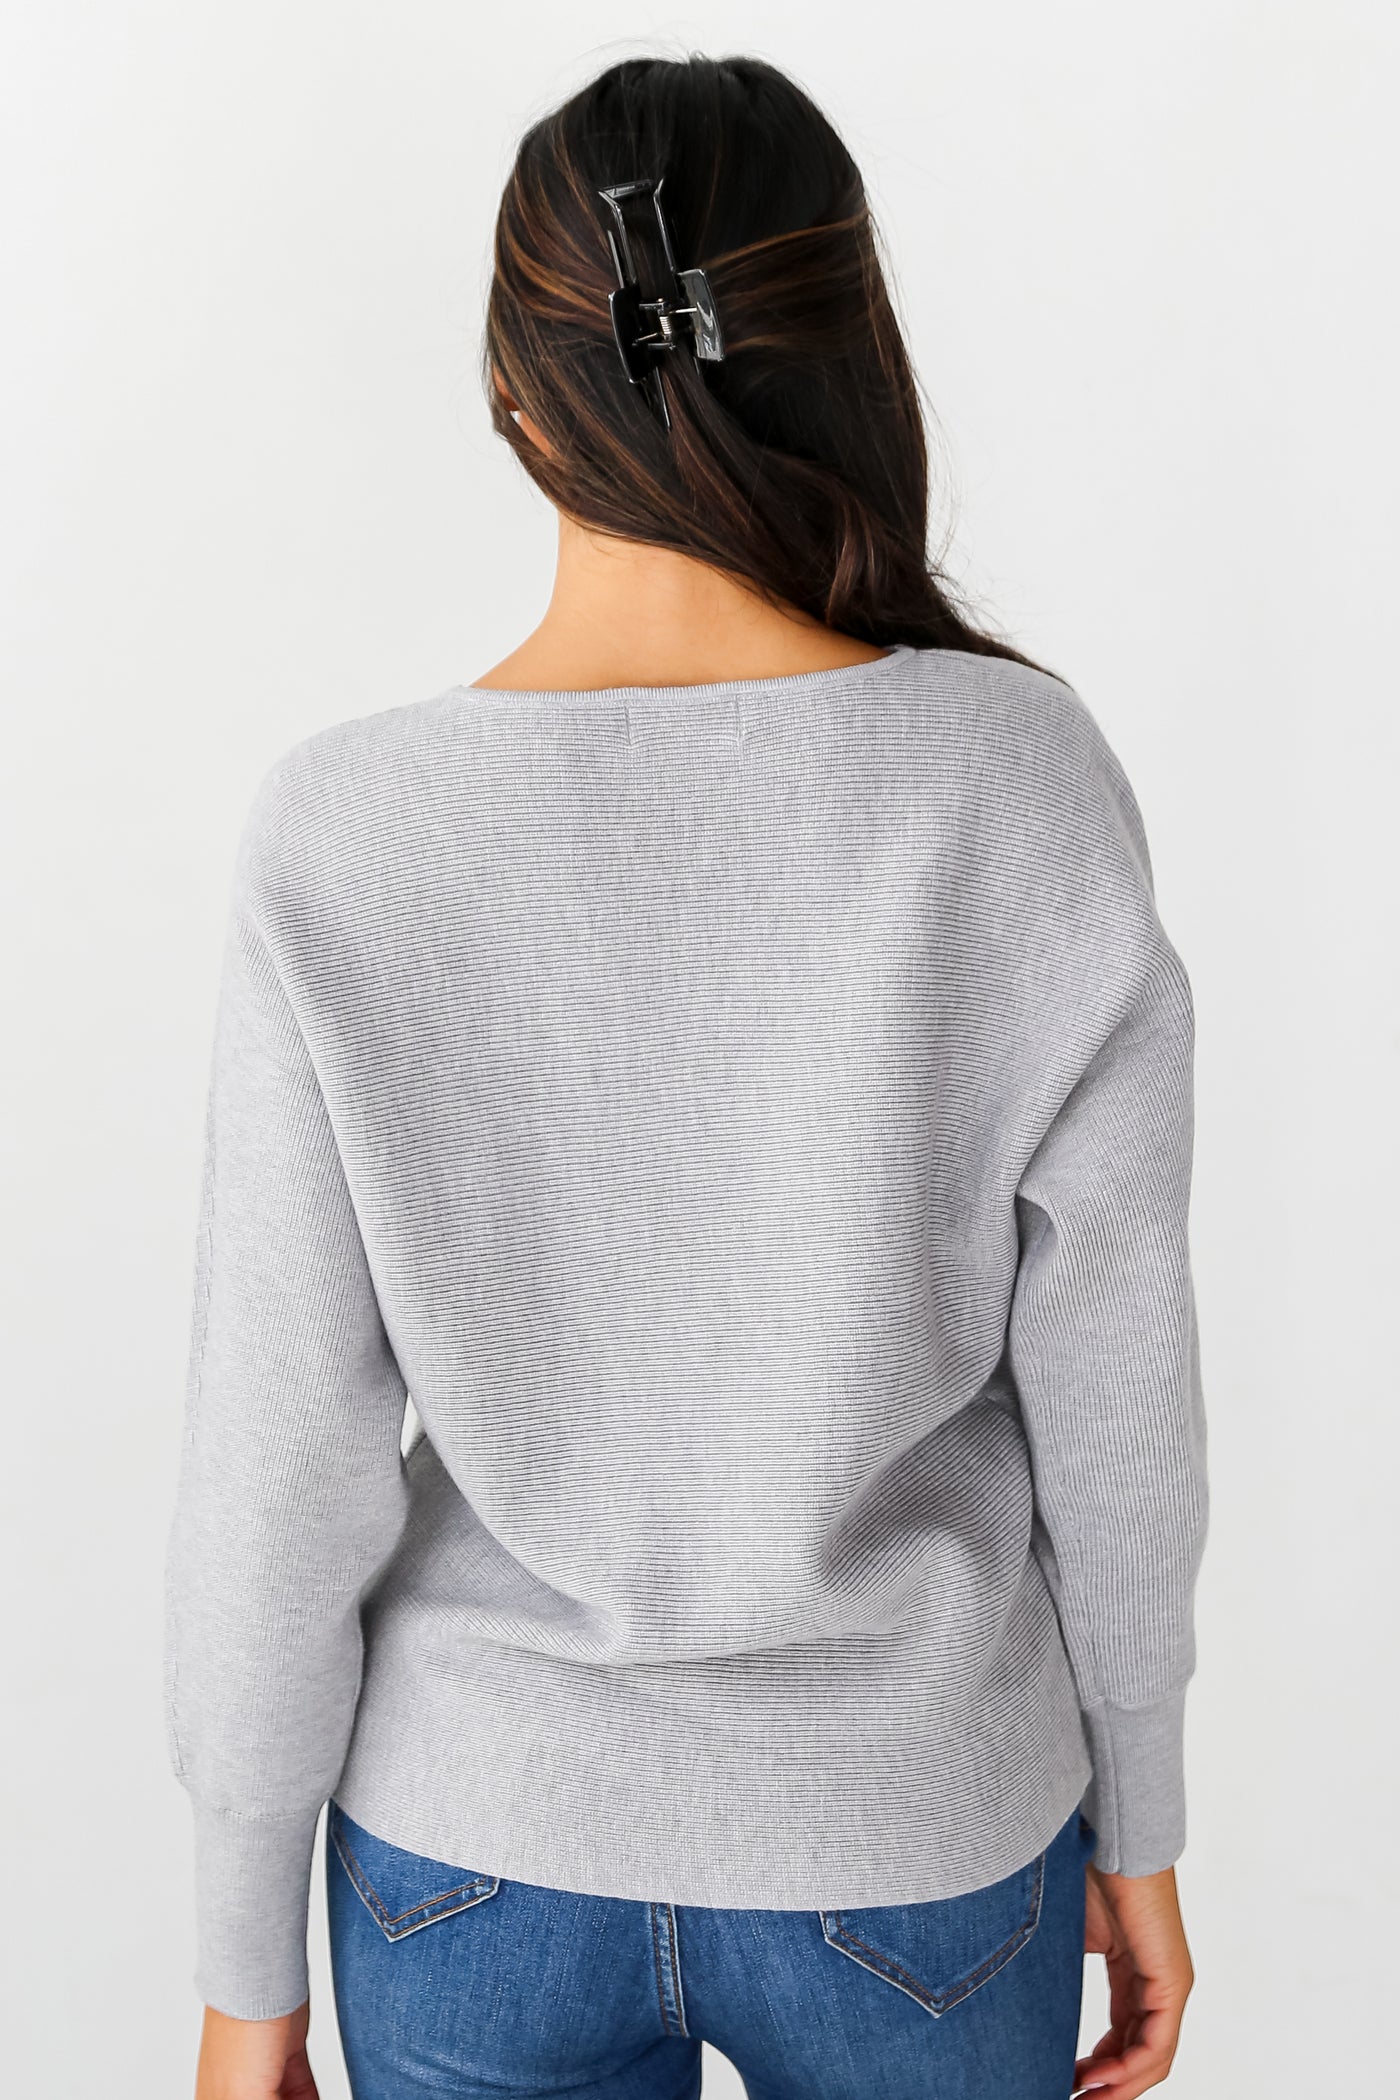 Heather Grey Ribbed Knit Sweater back view